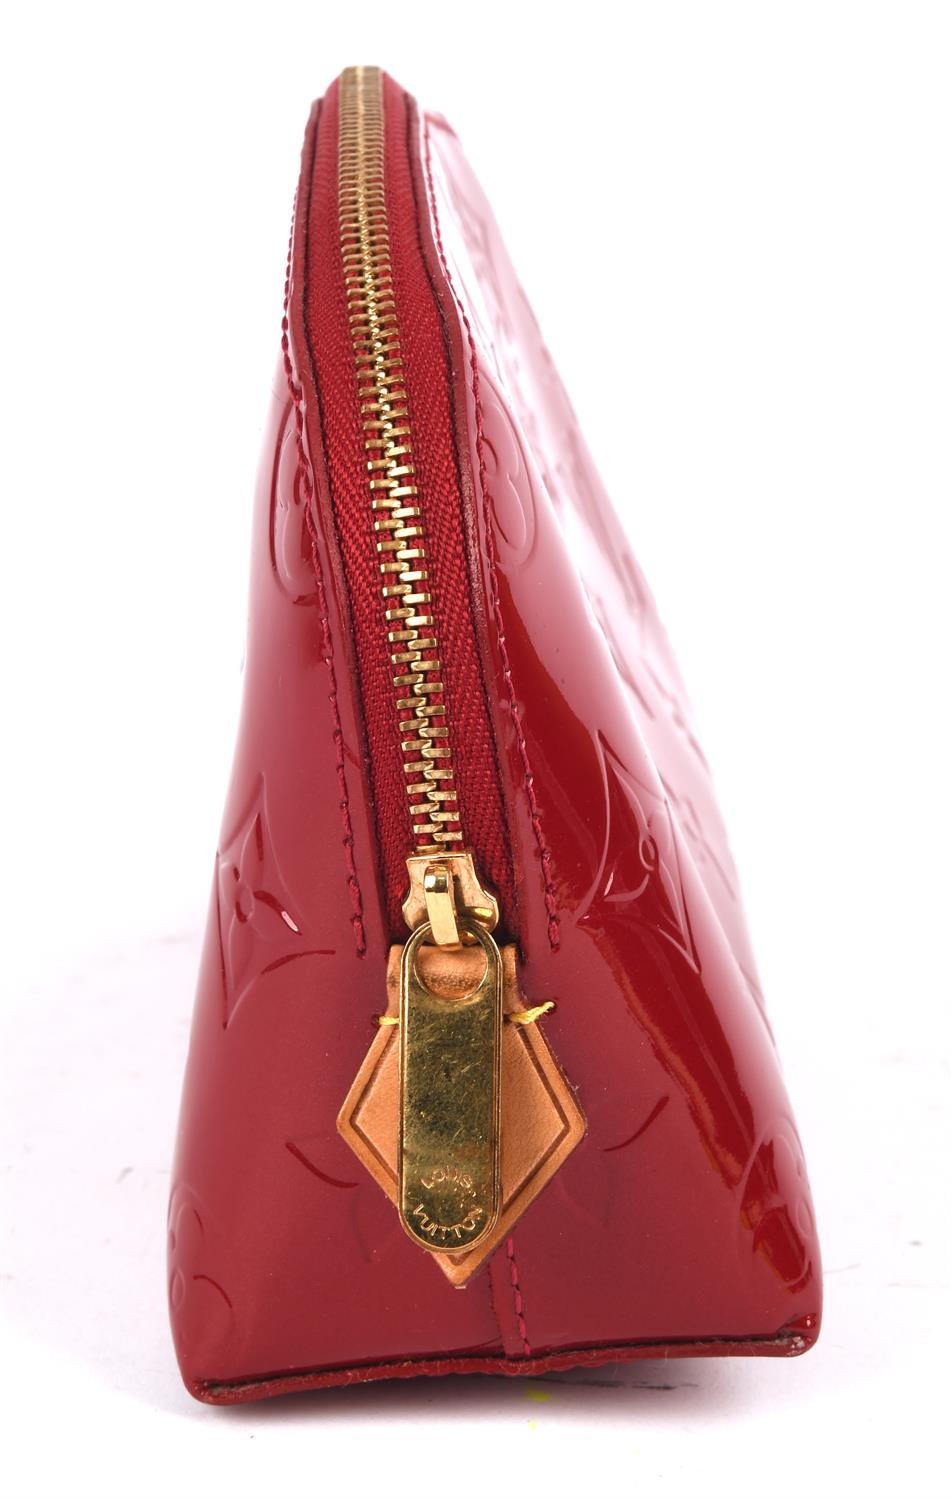 LOUIS VUITTON lipstick red varnished Vernis calf leather make-up bag with dust cloth (17cm x 13cm x - Image 3 of 6